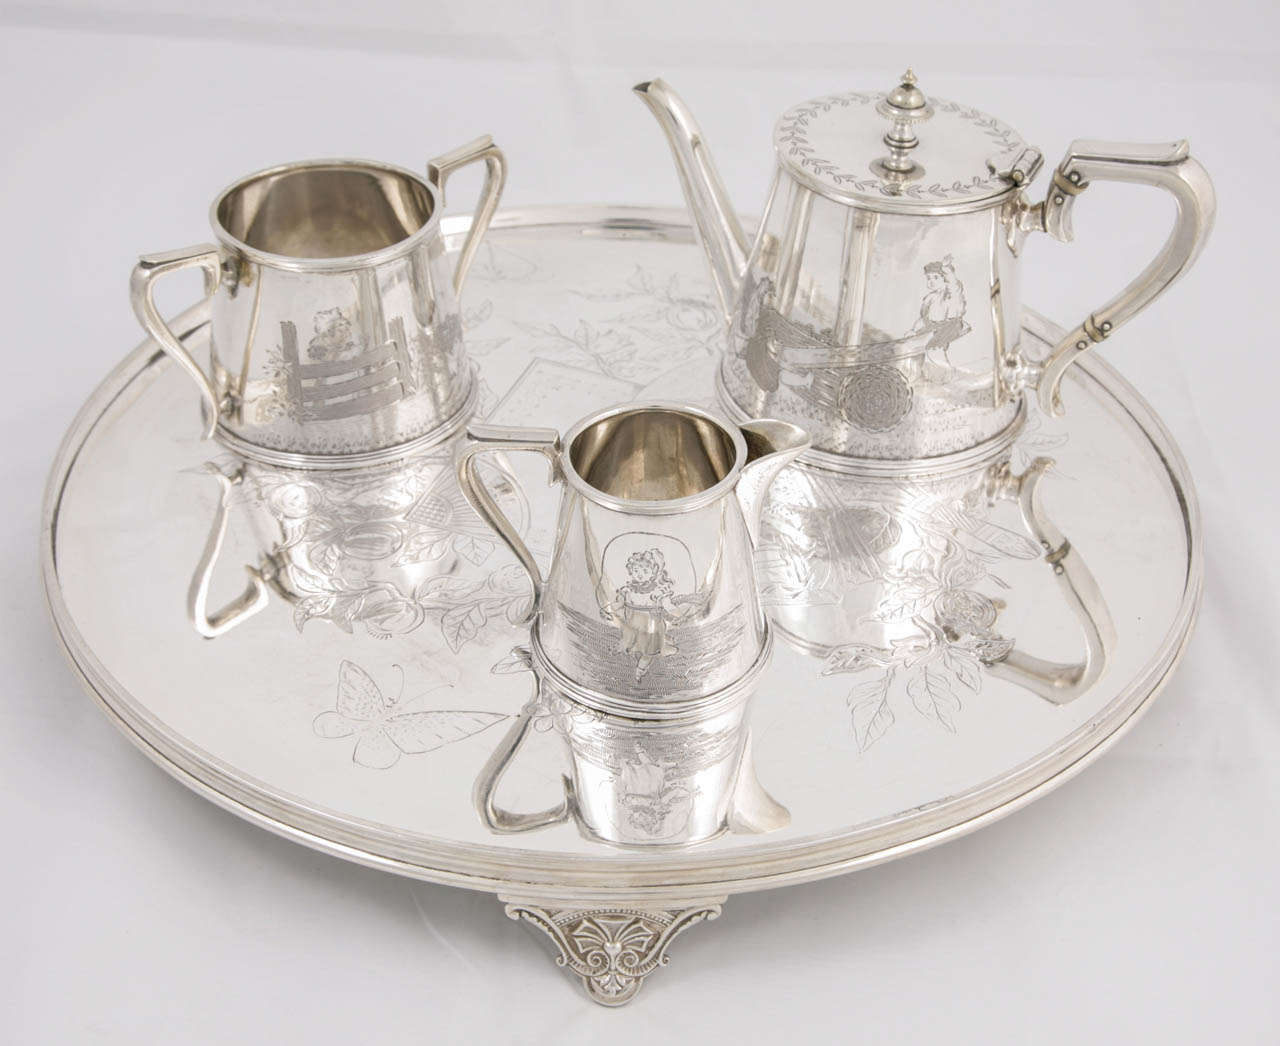 Silver plated three-piece child's tea set and tray with Kate Greenway scenes, circa 1890s, perfect for a child's nursery or given as a christening gift!